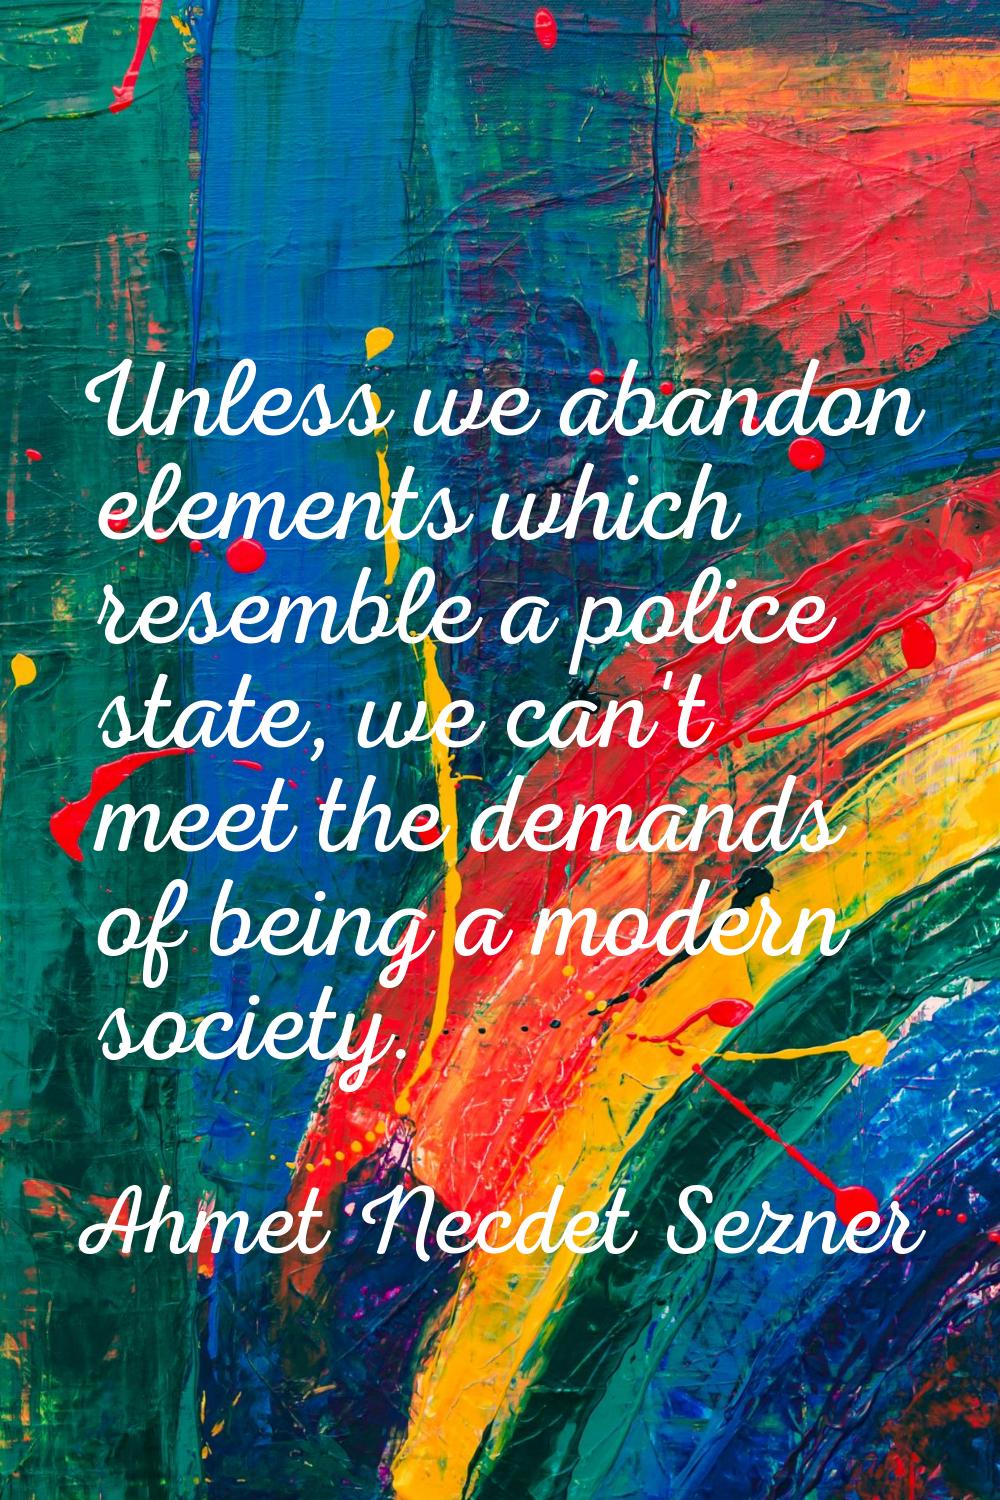 Unless we abandon elements which resemble a police state, we can't meet the demands of being a mode